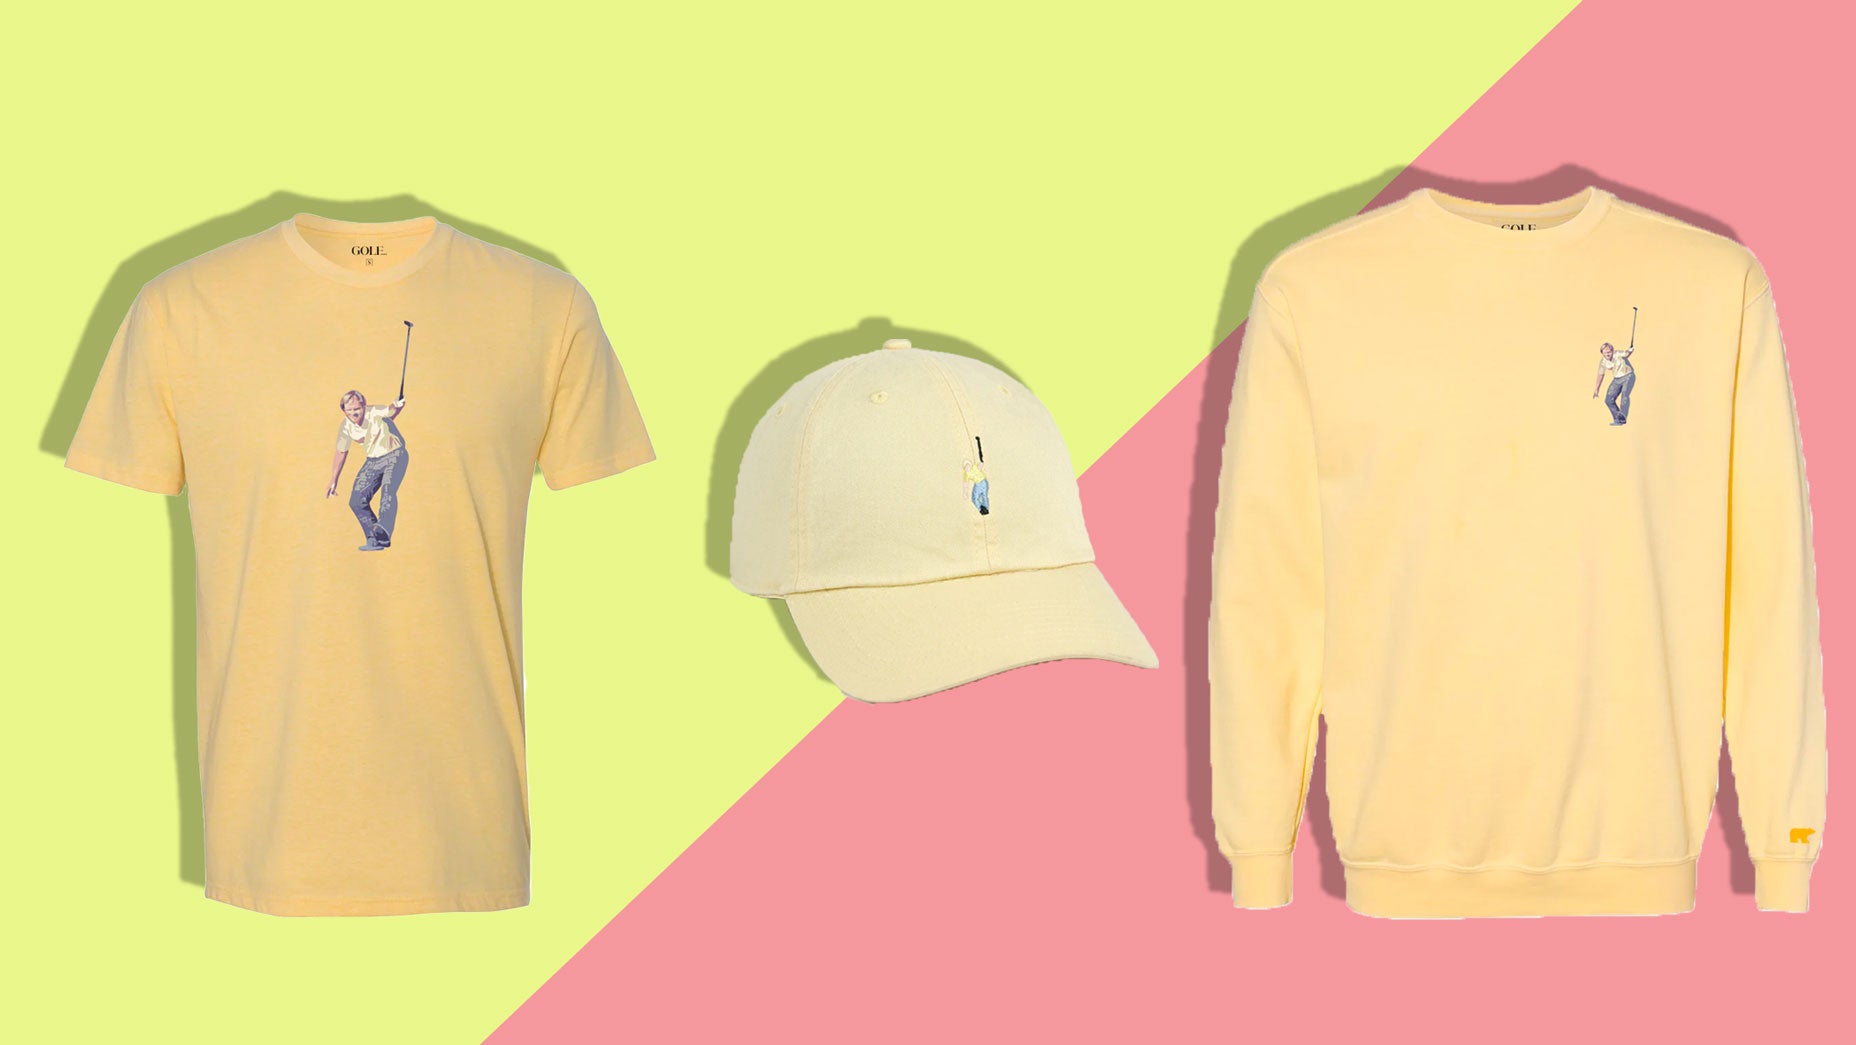 Selling Fast! Limited-edition Nicklaus ’86 merch on sale now